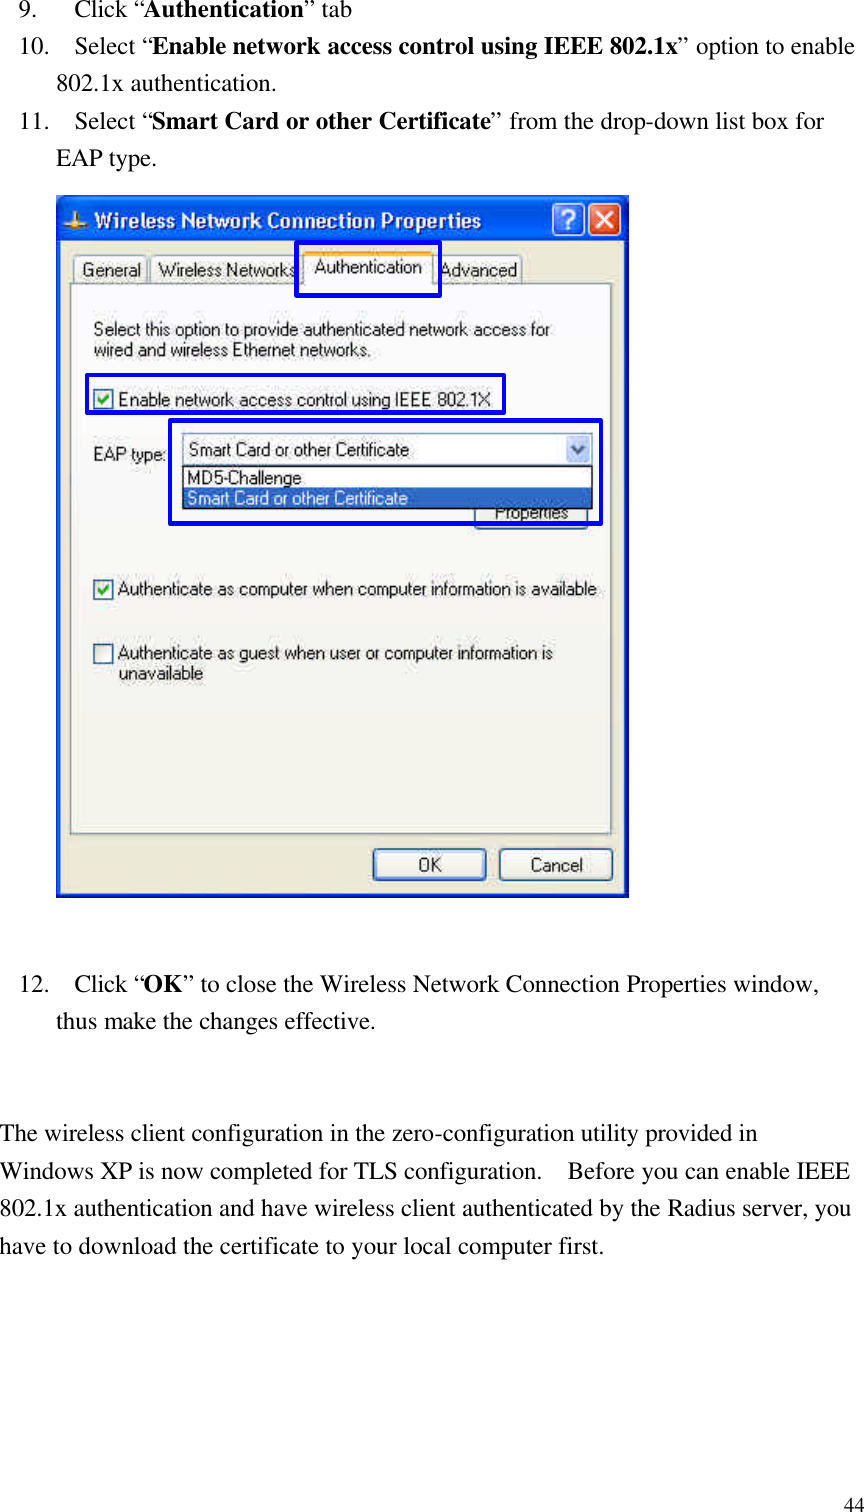  449. Click “Authentication” tab 10. Select “Enable network access control using IEEE 802.1x” option to enable 802.1x authentication. 11. Select “Smart Card or other Certificate” from the drop-down list box for EAP type.                      12. Click “OK” to close the Wireless Network Connection Properties window, thus make the changes effective.   The wireless client configuration in the zero-configuration utility provided in Windows XP is now completed for TLS configuration.  Before you can enable IEEE 802.1x authentication and have wireless client authenticated by the Radius server, you have to download the certificate to your local computer first. 